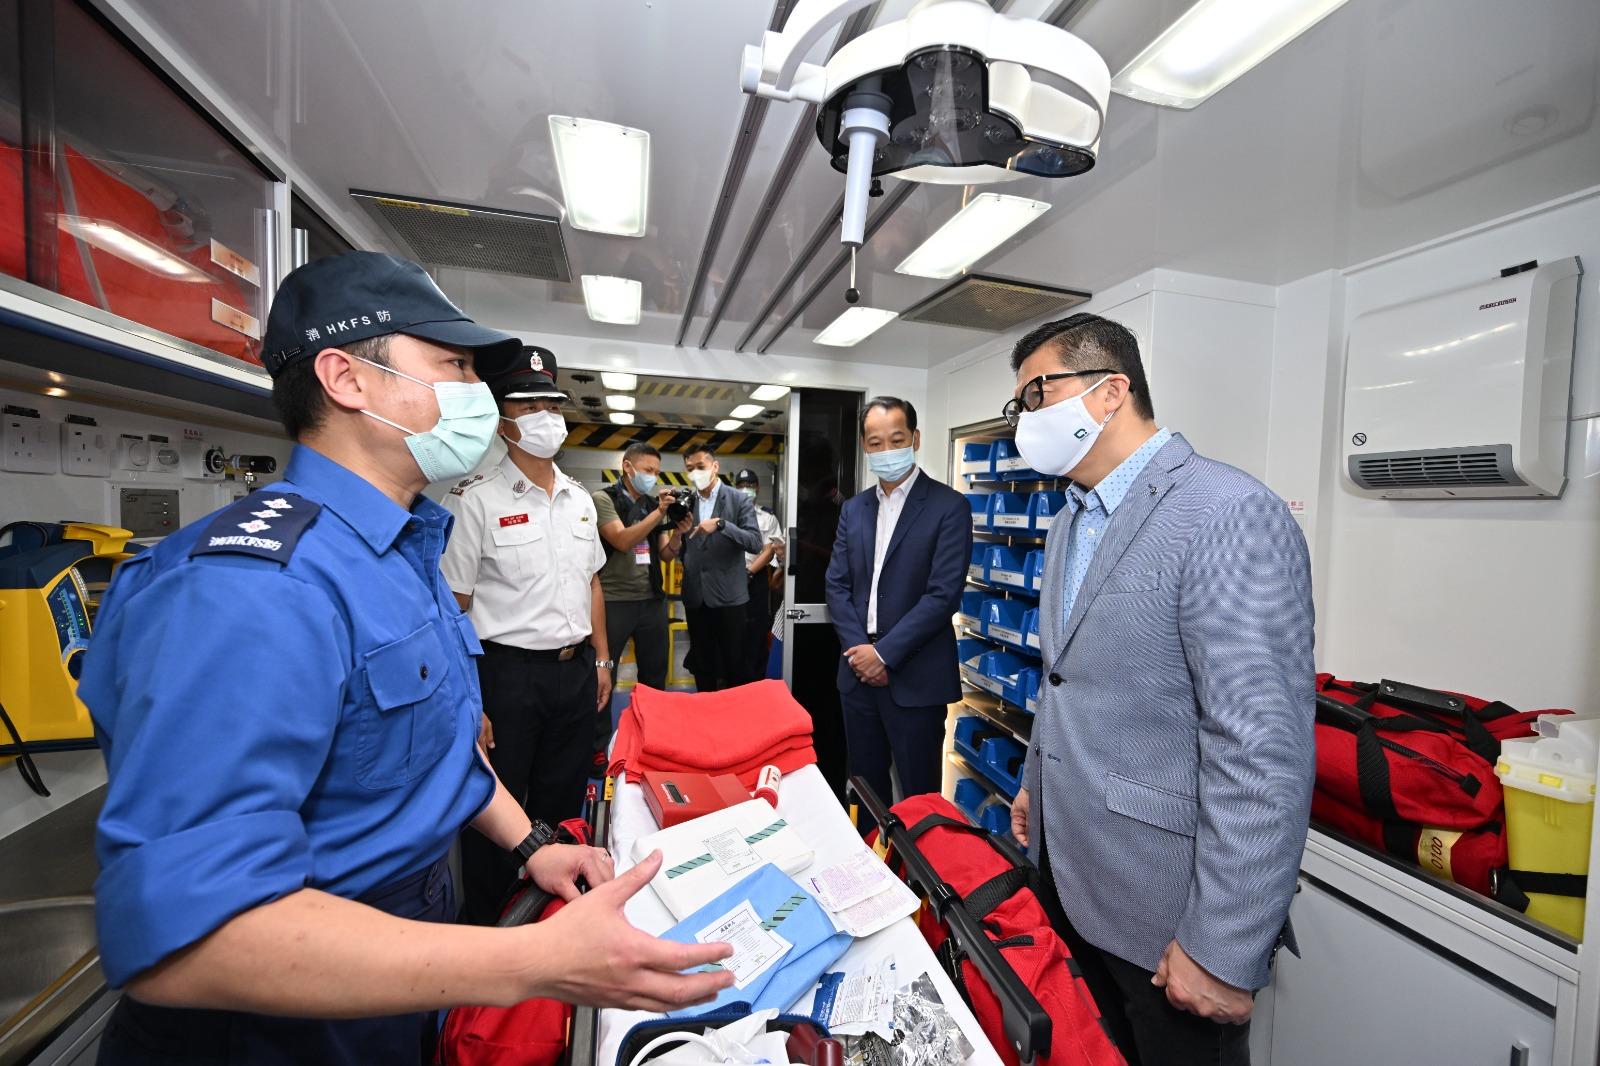 The Secretary for Security, Mr Tang Ping-keung, this morning (May 8) inspected the security arrangements in the vicinity of the Hong Kong Convention and Exhibition Centre to ensure the 2022 Chief Executive Election be conducted in a safe and orderly manner. Photo shows Mr Tang (first right) being briefed by the ambulance personnel on emergency and rescue services in the Fire Services Department's Mobile Casualty Treatment Centre.